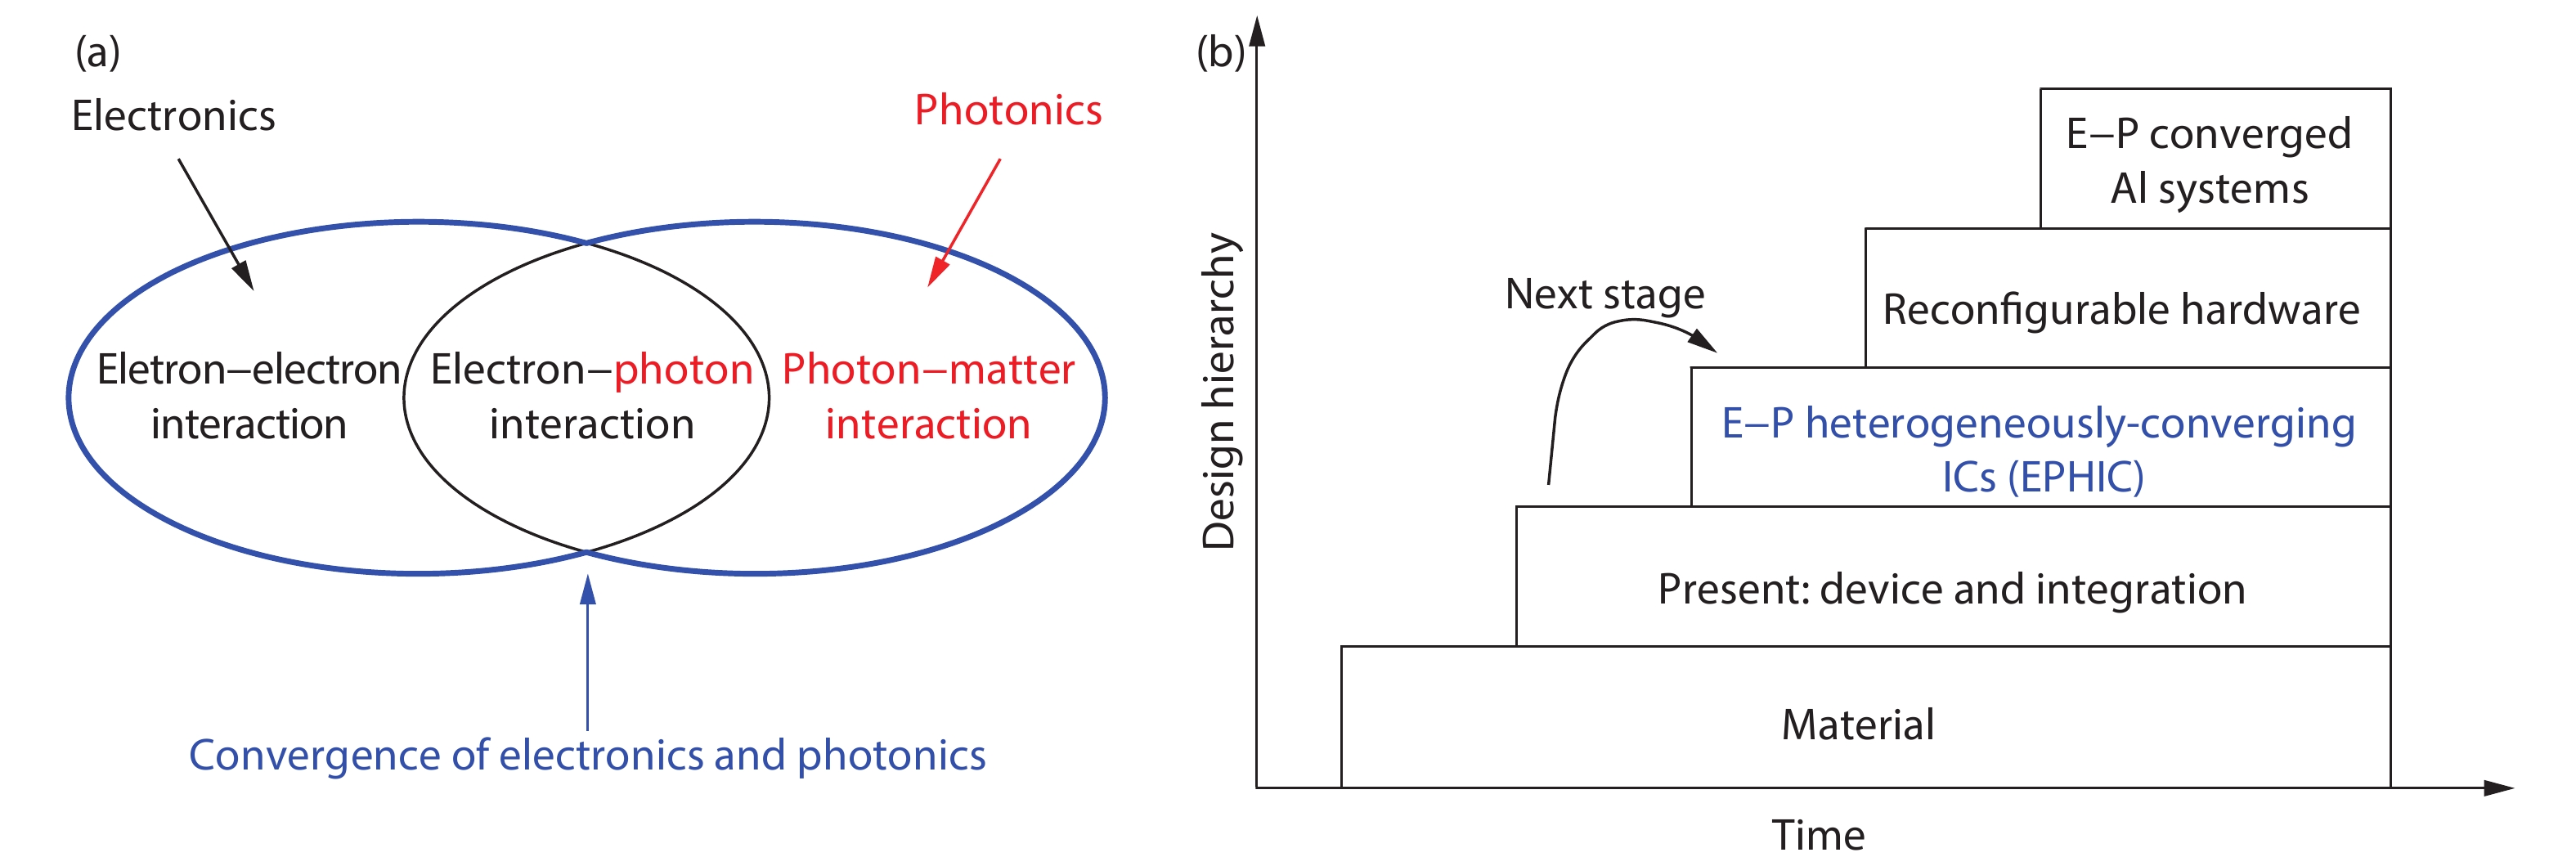 (Color online) (a) The convergence of electronics and photonics. (b) Design hierarchy of electronic-photonic convergence[2].